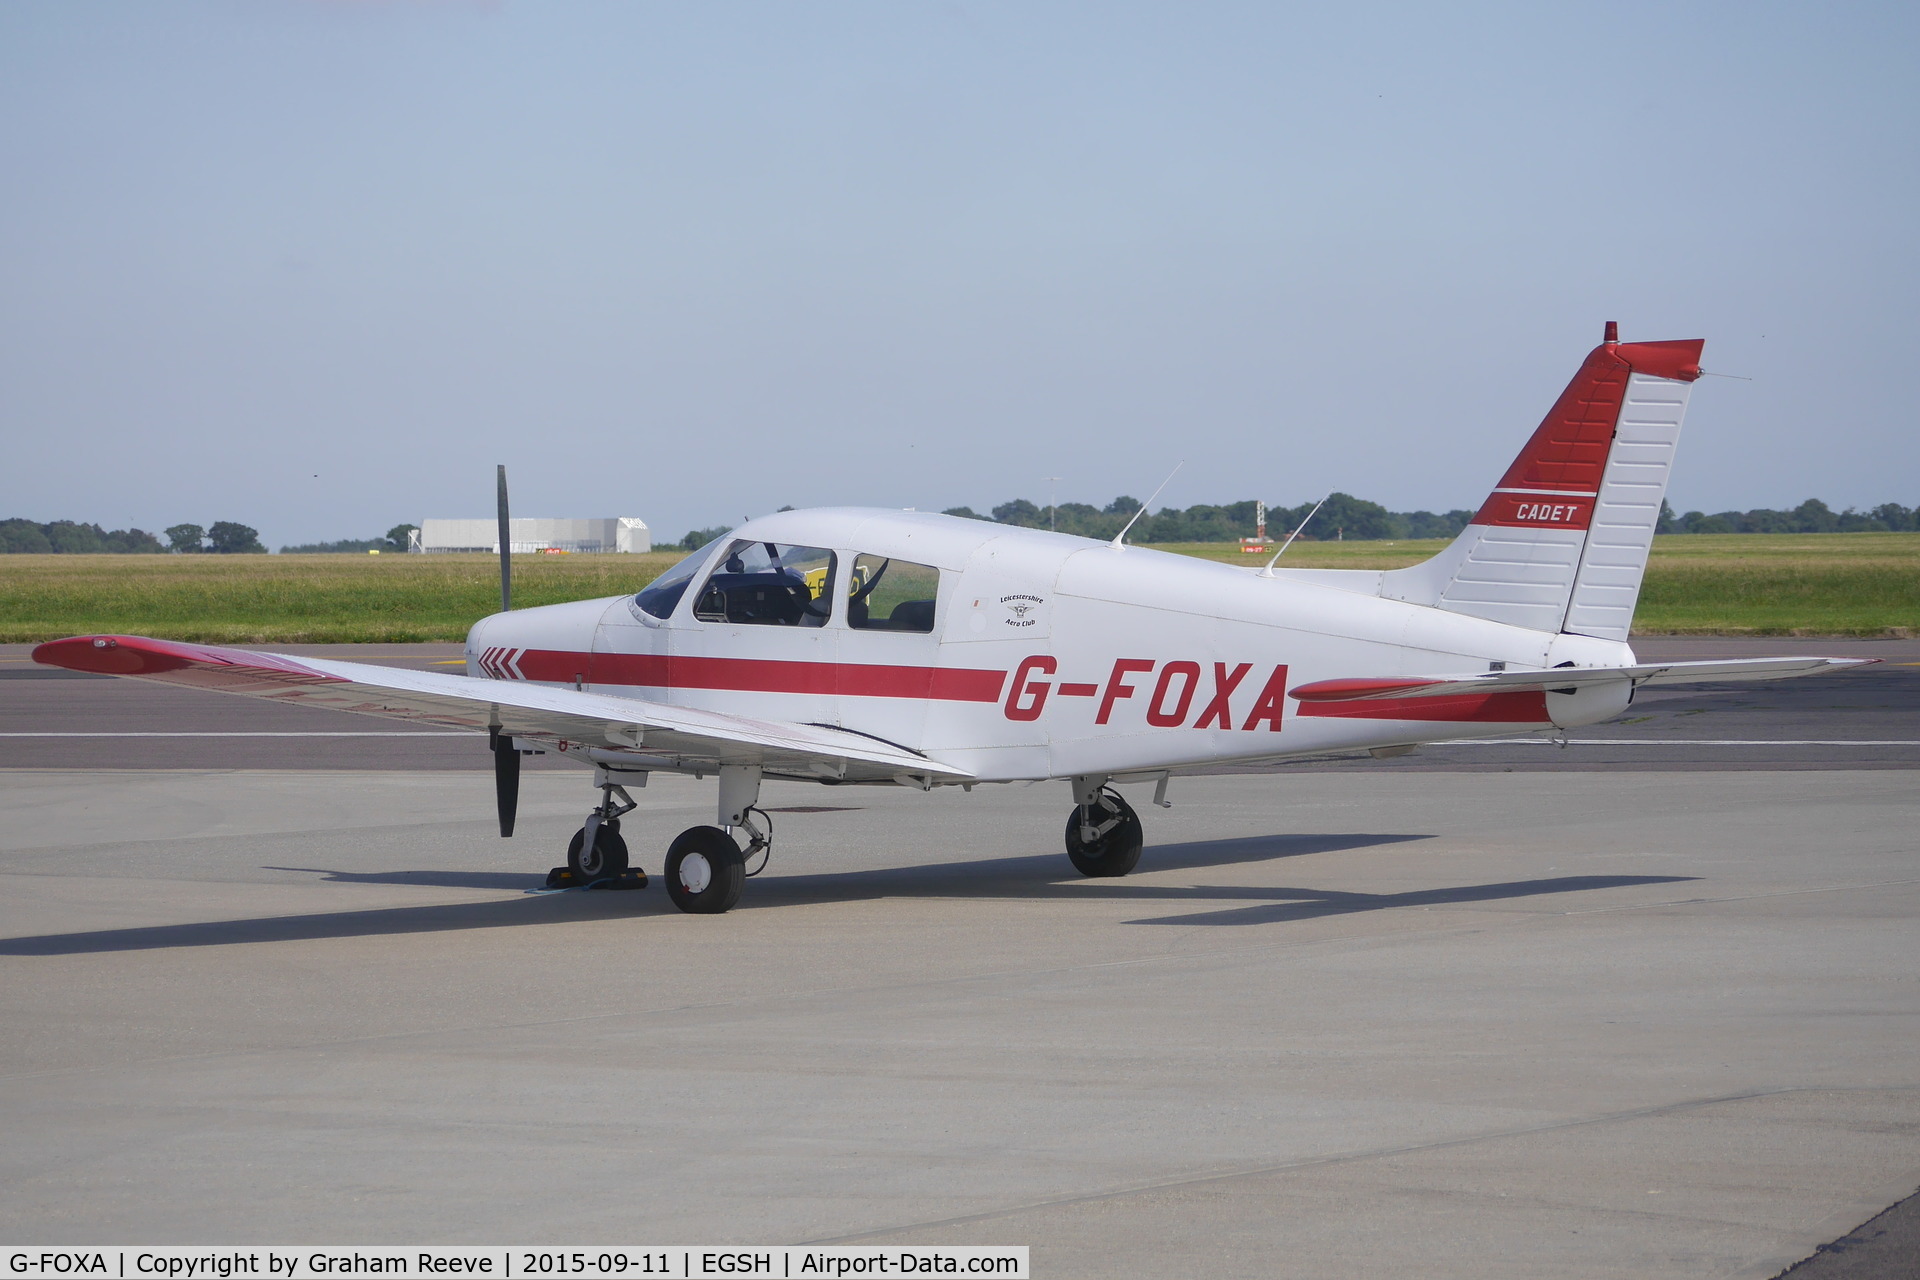 G-FOXA, 1988 Piper PA-28-161 Cadet C/N 2841240, Parked at Norwich.